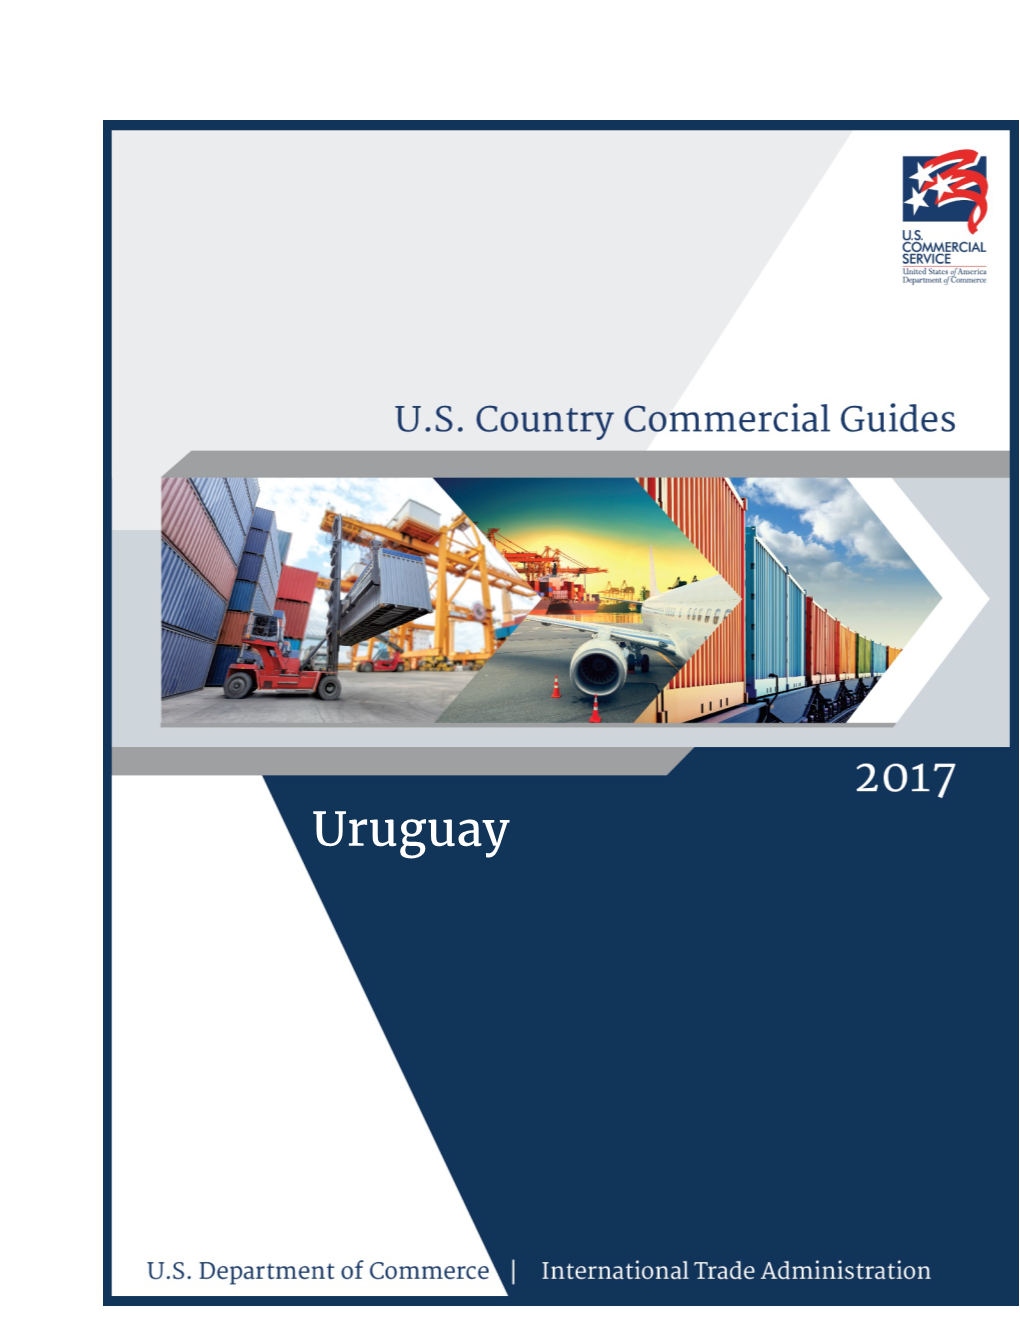 Uruguay Commercial Guide